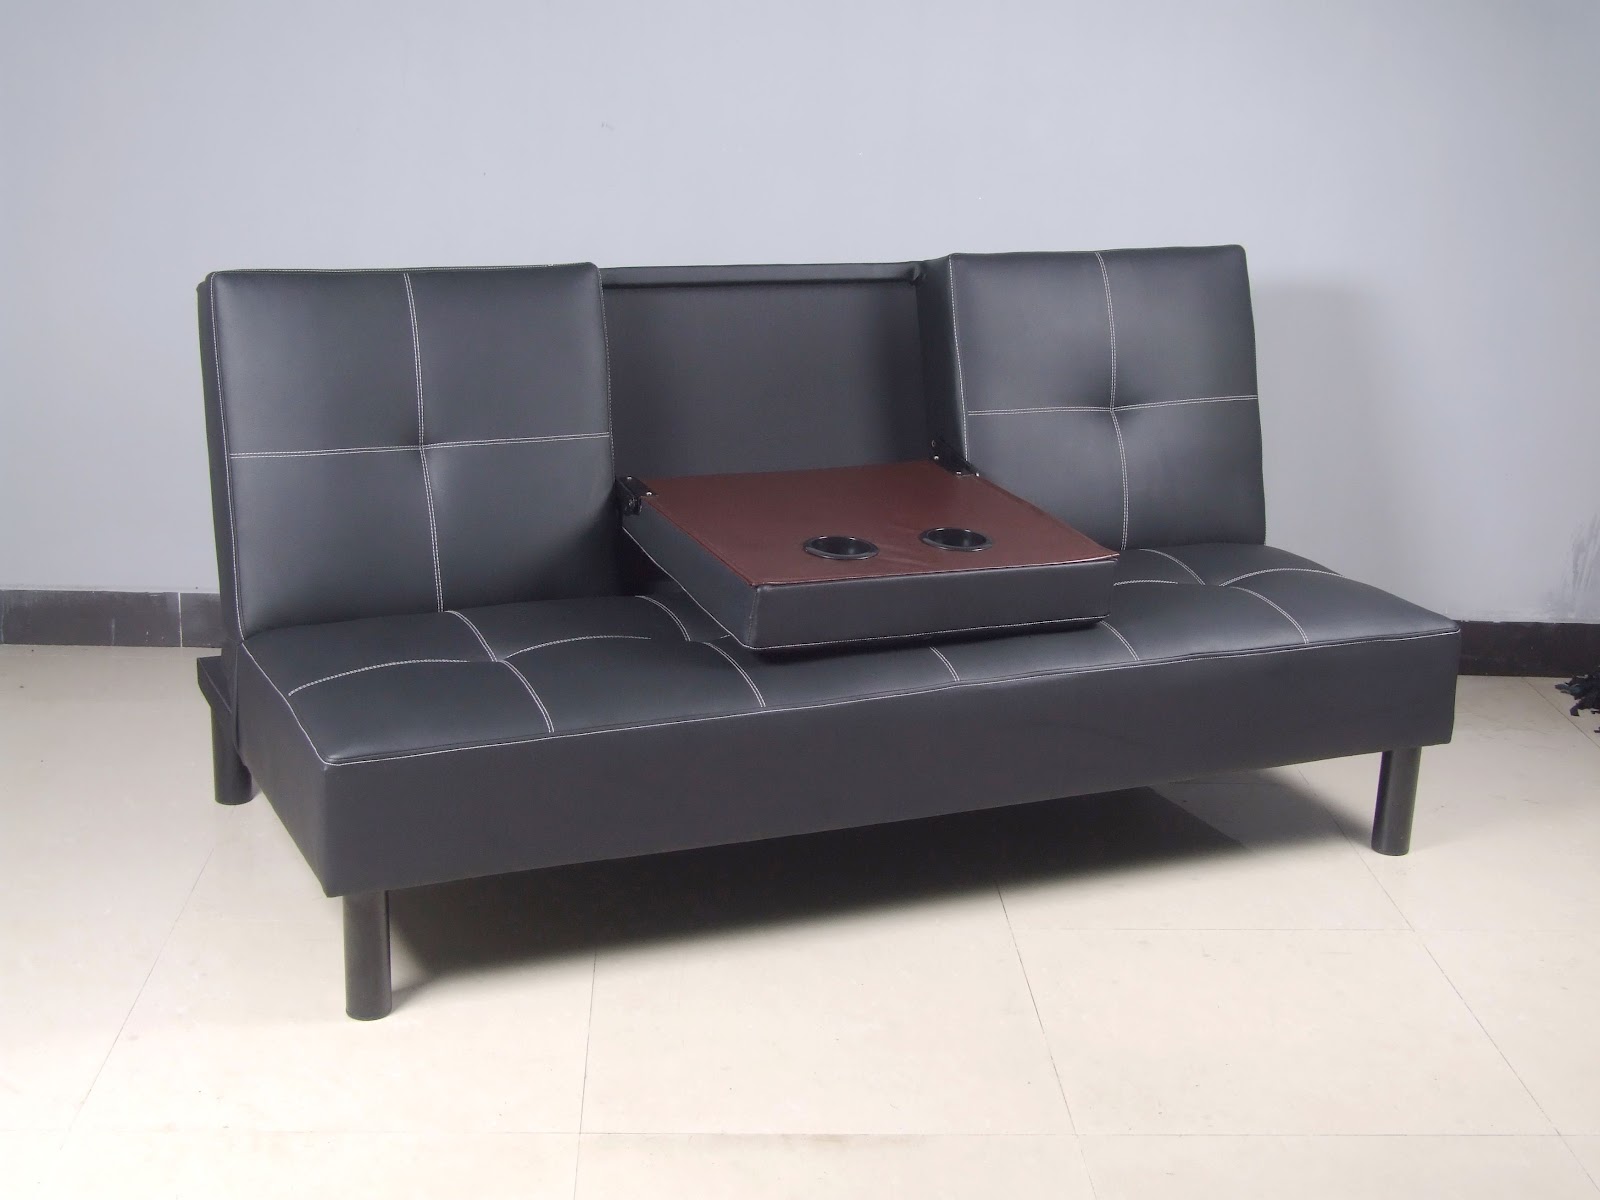 Click Clack Sofa Bed | Sofa chair bed | Modern Leather sofa bed ikea